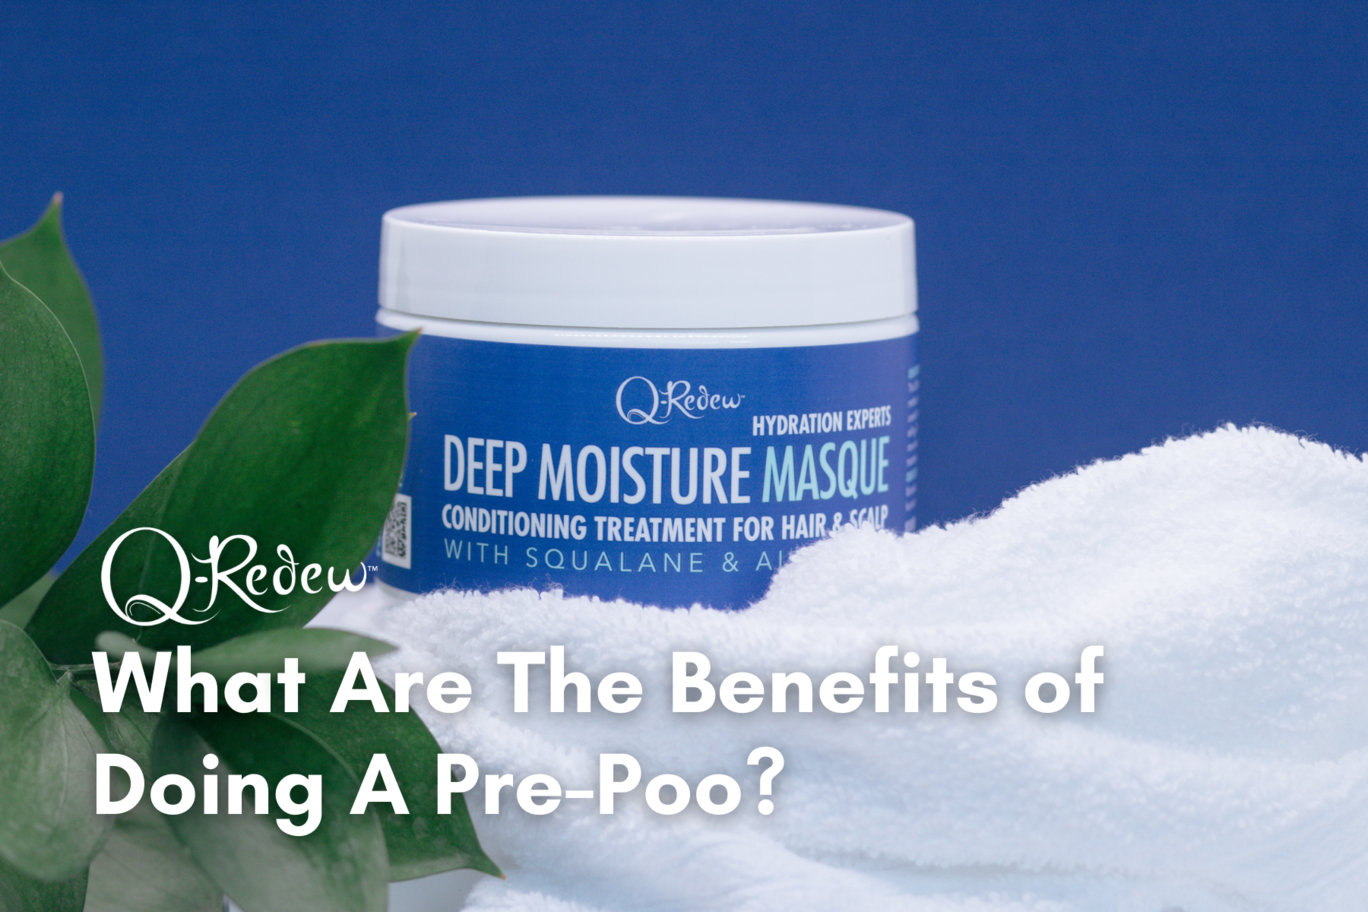 What Are the Benefits of Doing a Pre-Poo?